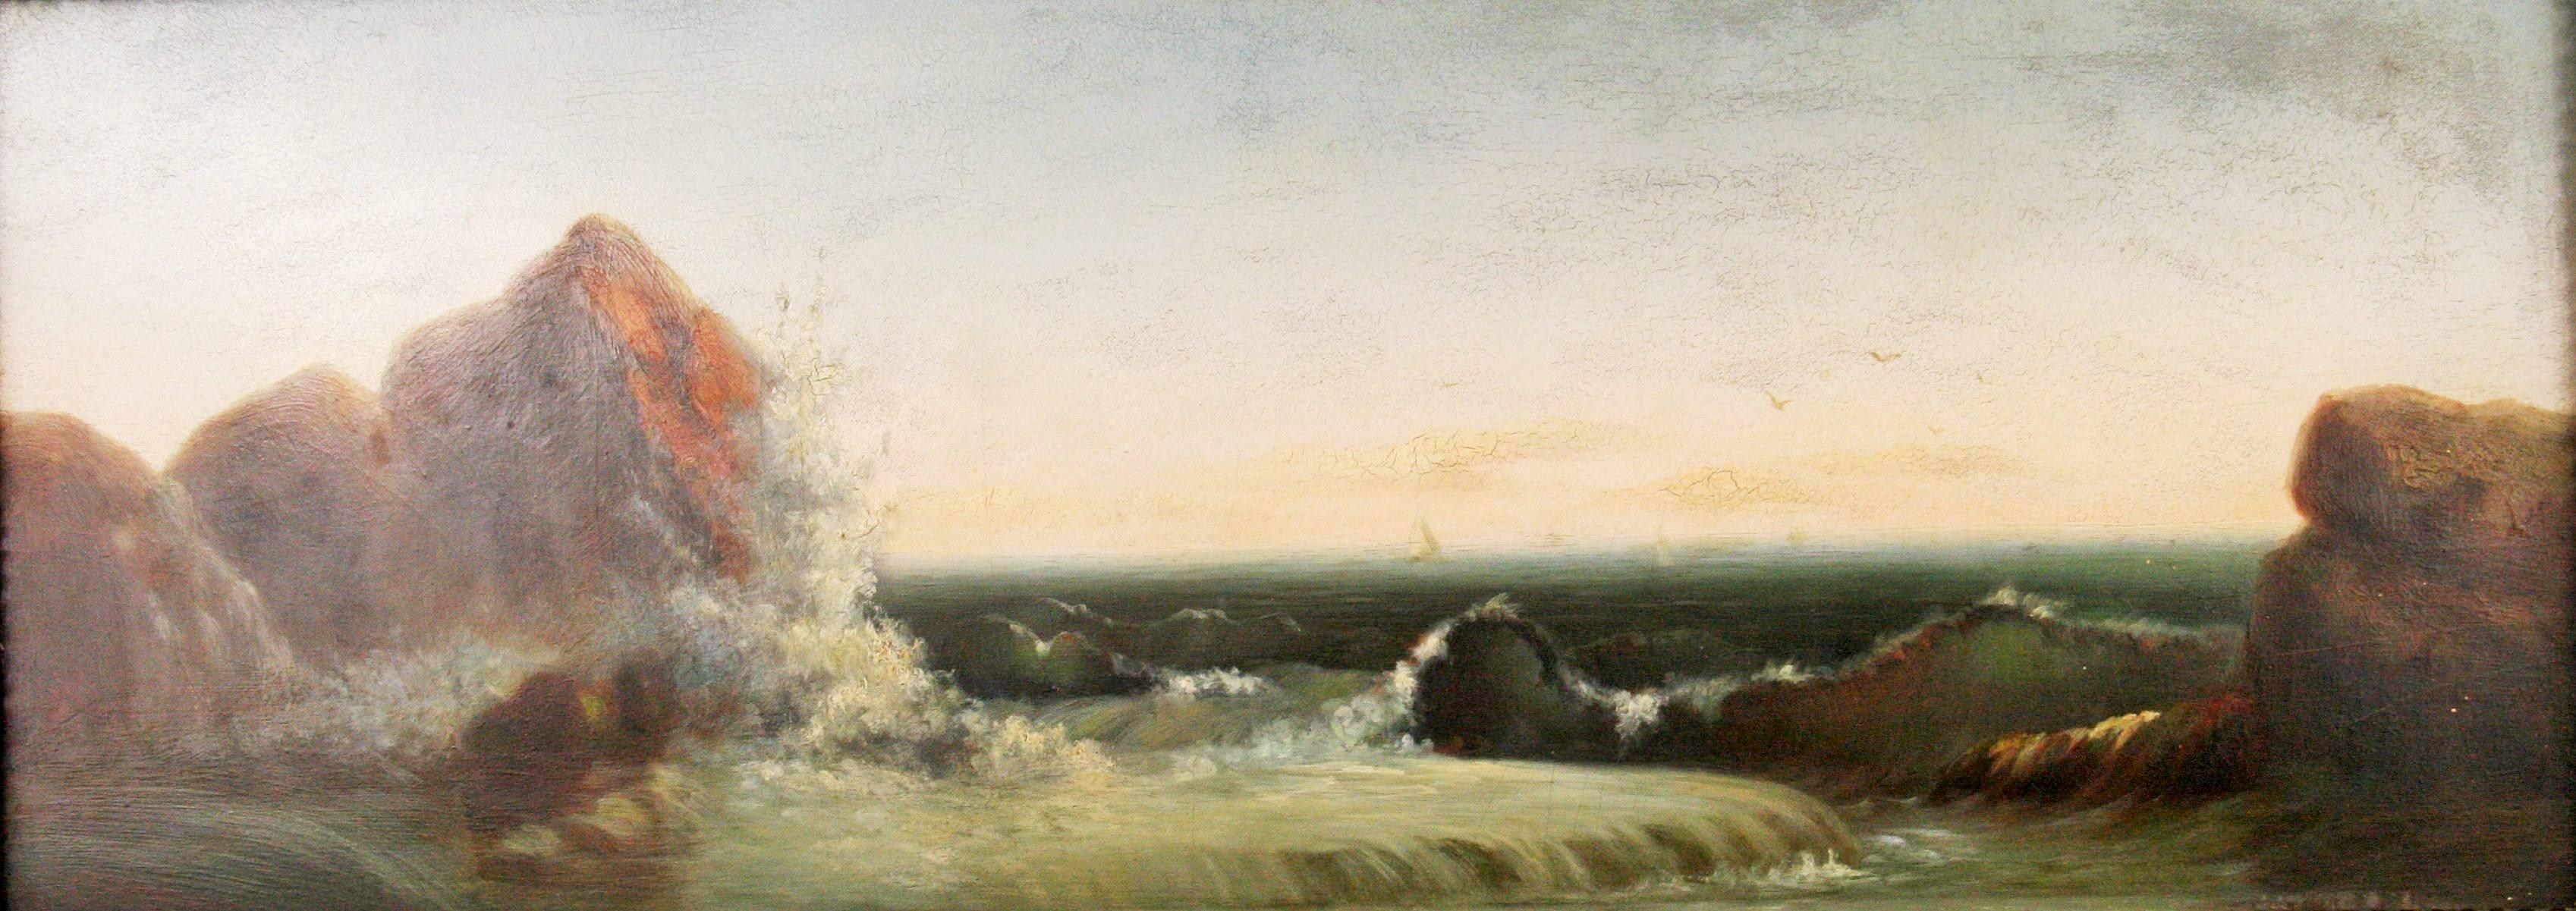 Crashing Waves Seascape - Beige Landscape Painting by Unknown